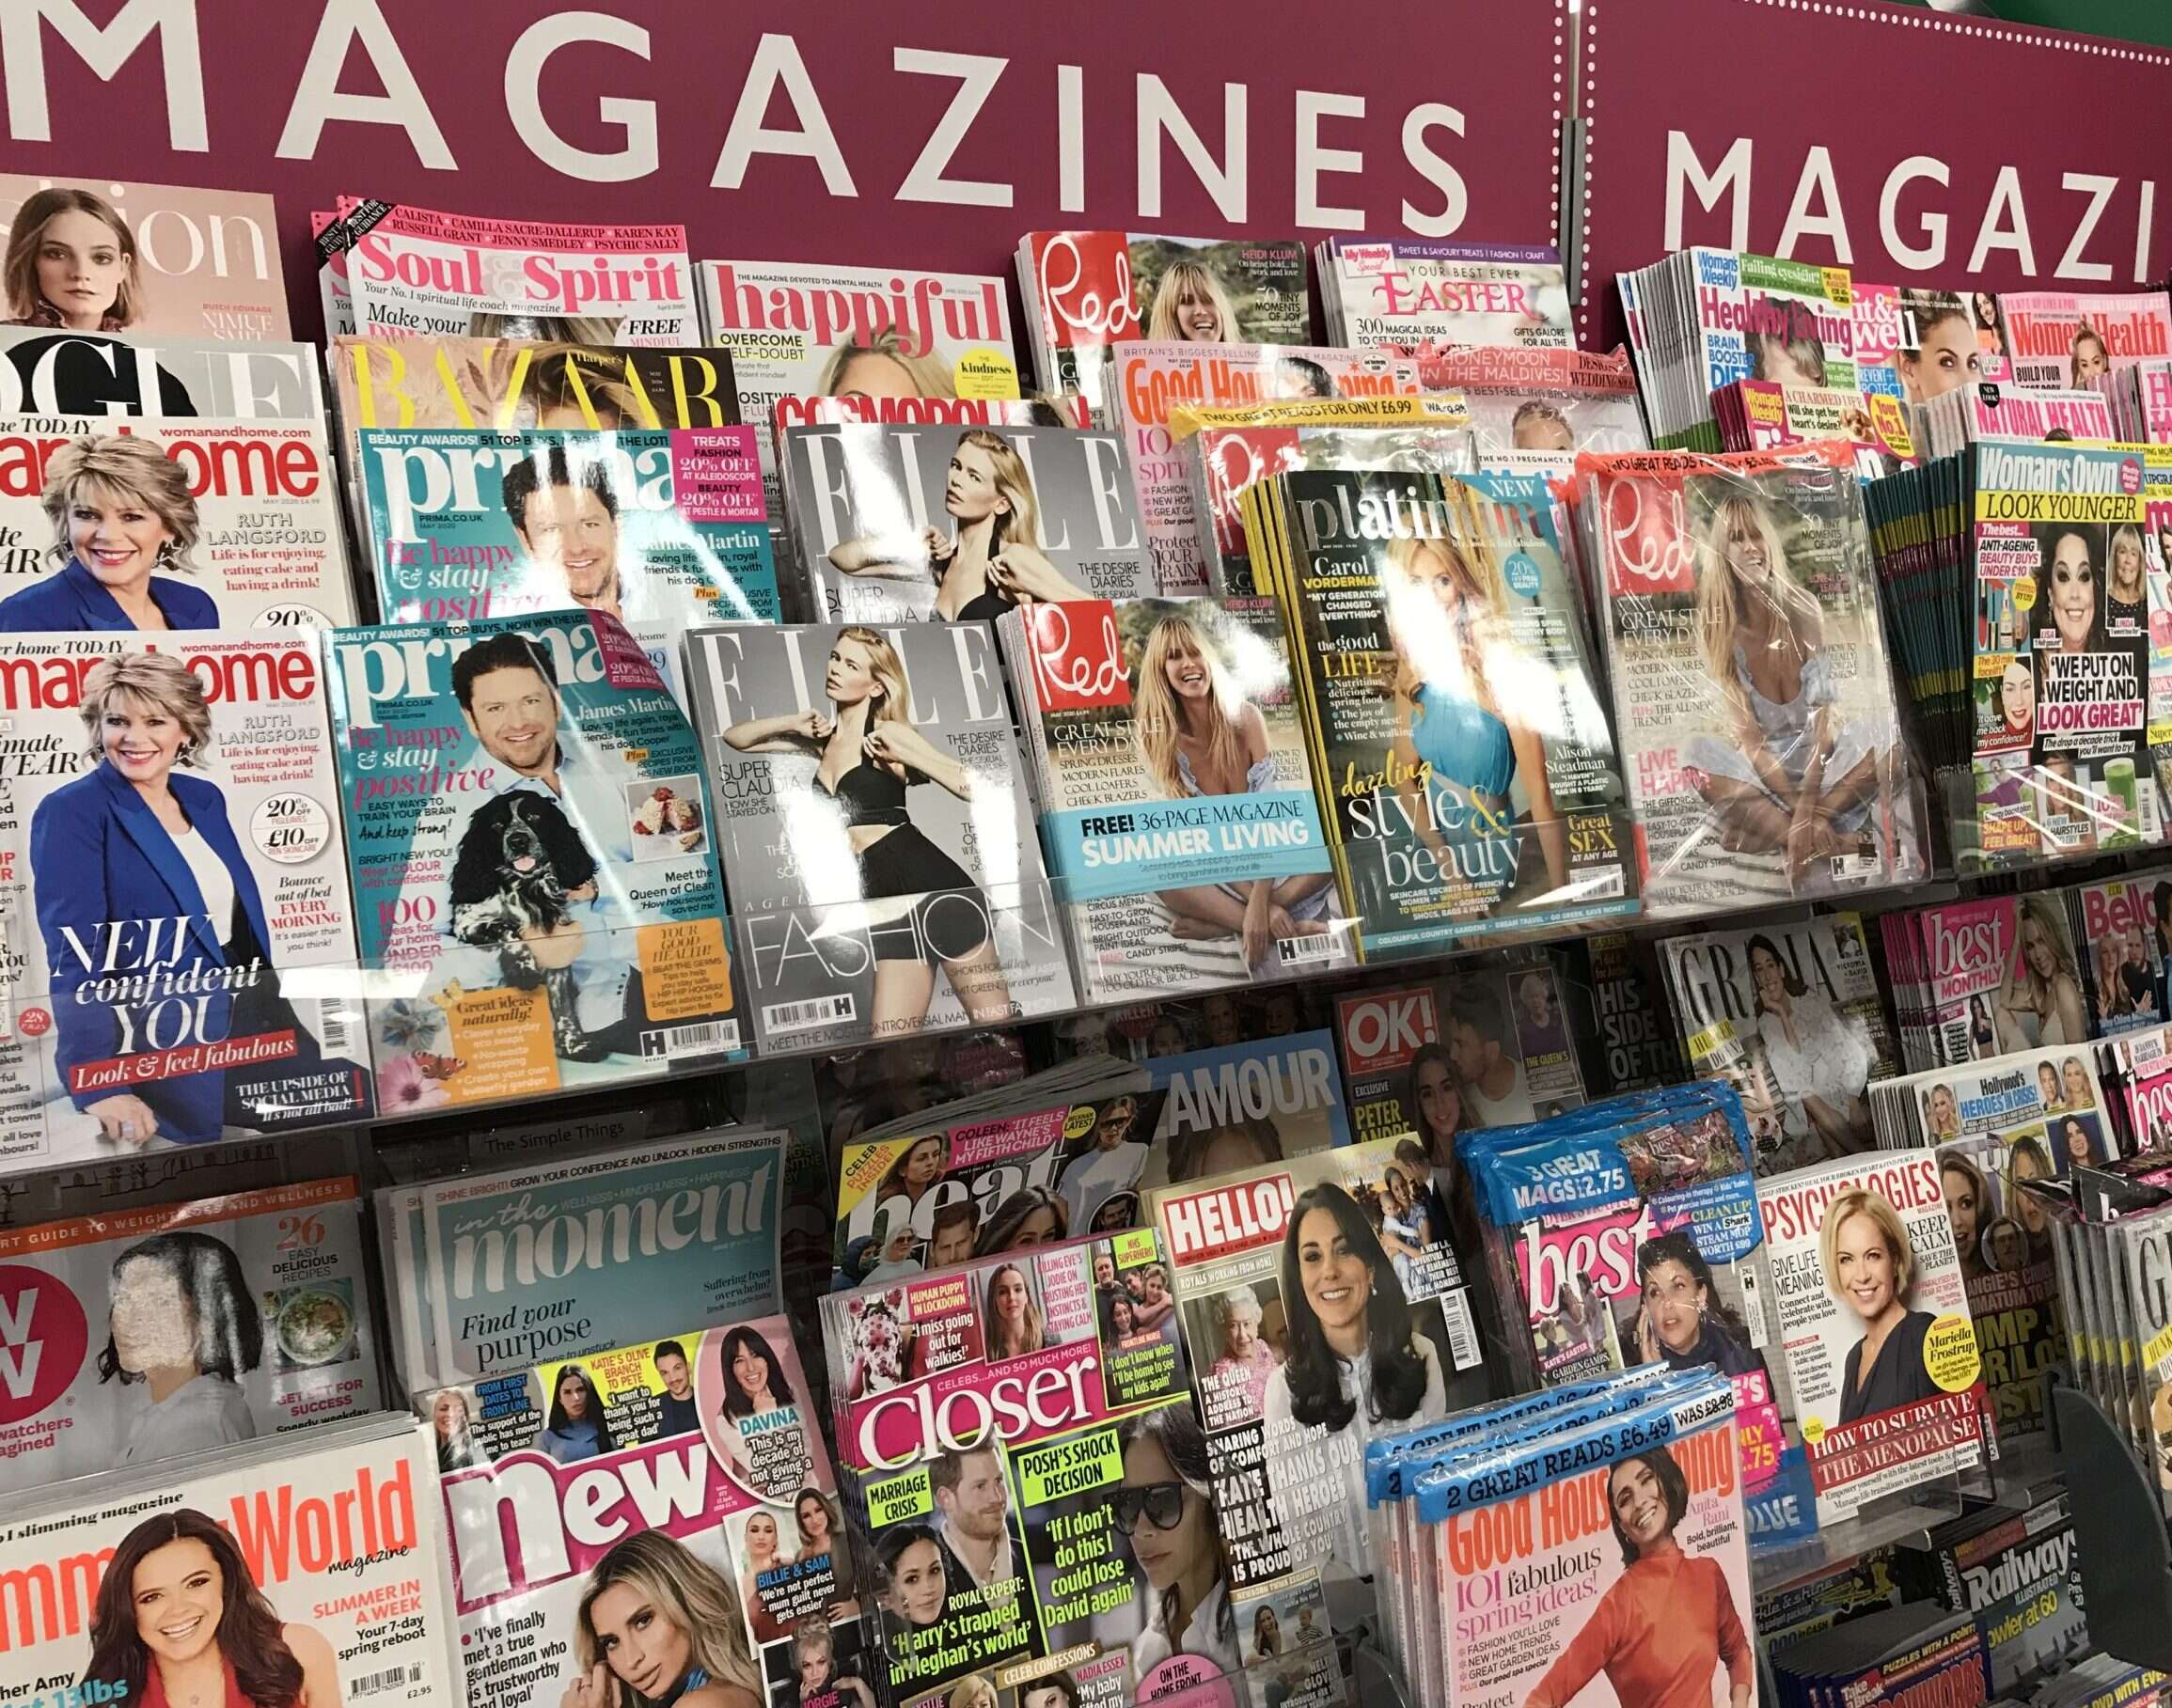 Pamco: Monthly mags fare better than weeklies under lockdown with some big audience gains